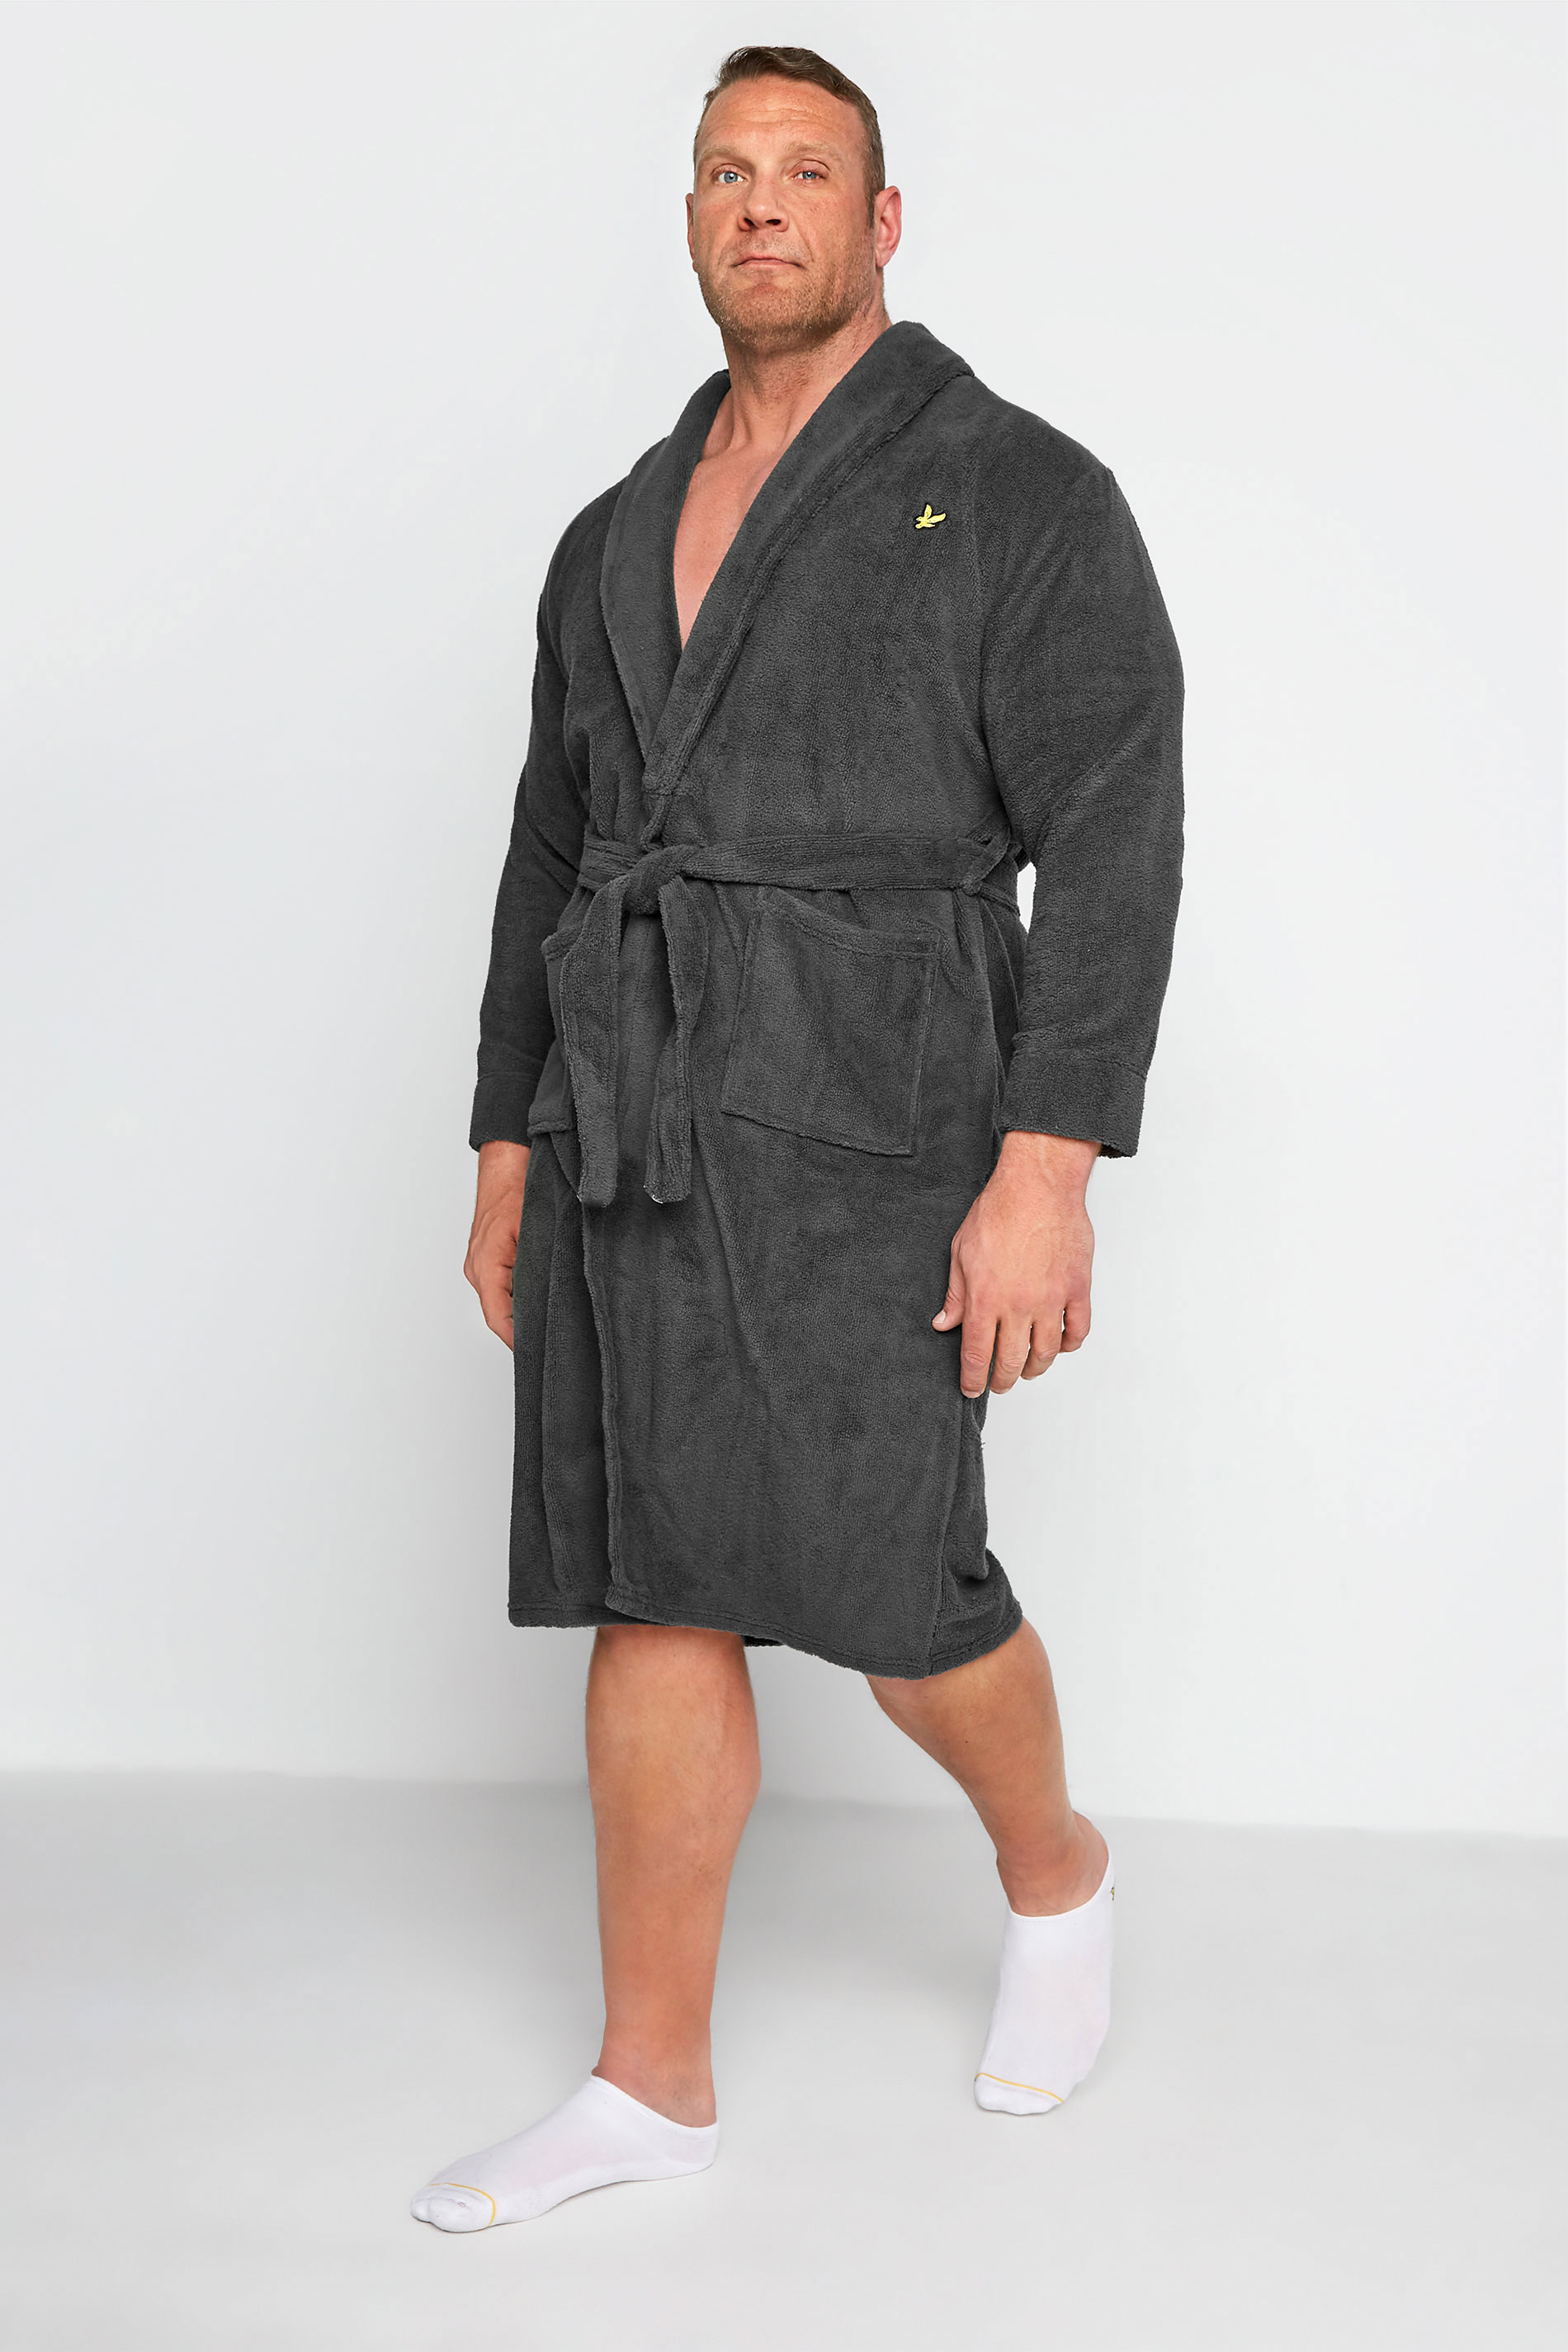 Image of Size 4Xl Mens Lyle & Scott Big & Tall Charcoal Grey Lucas Dressing Gown Big & Tall